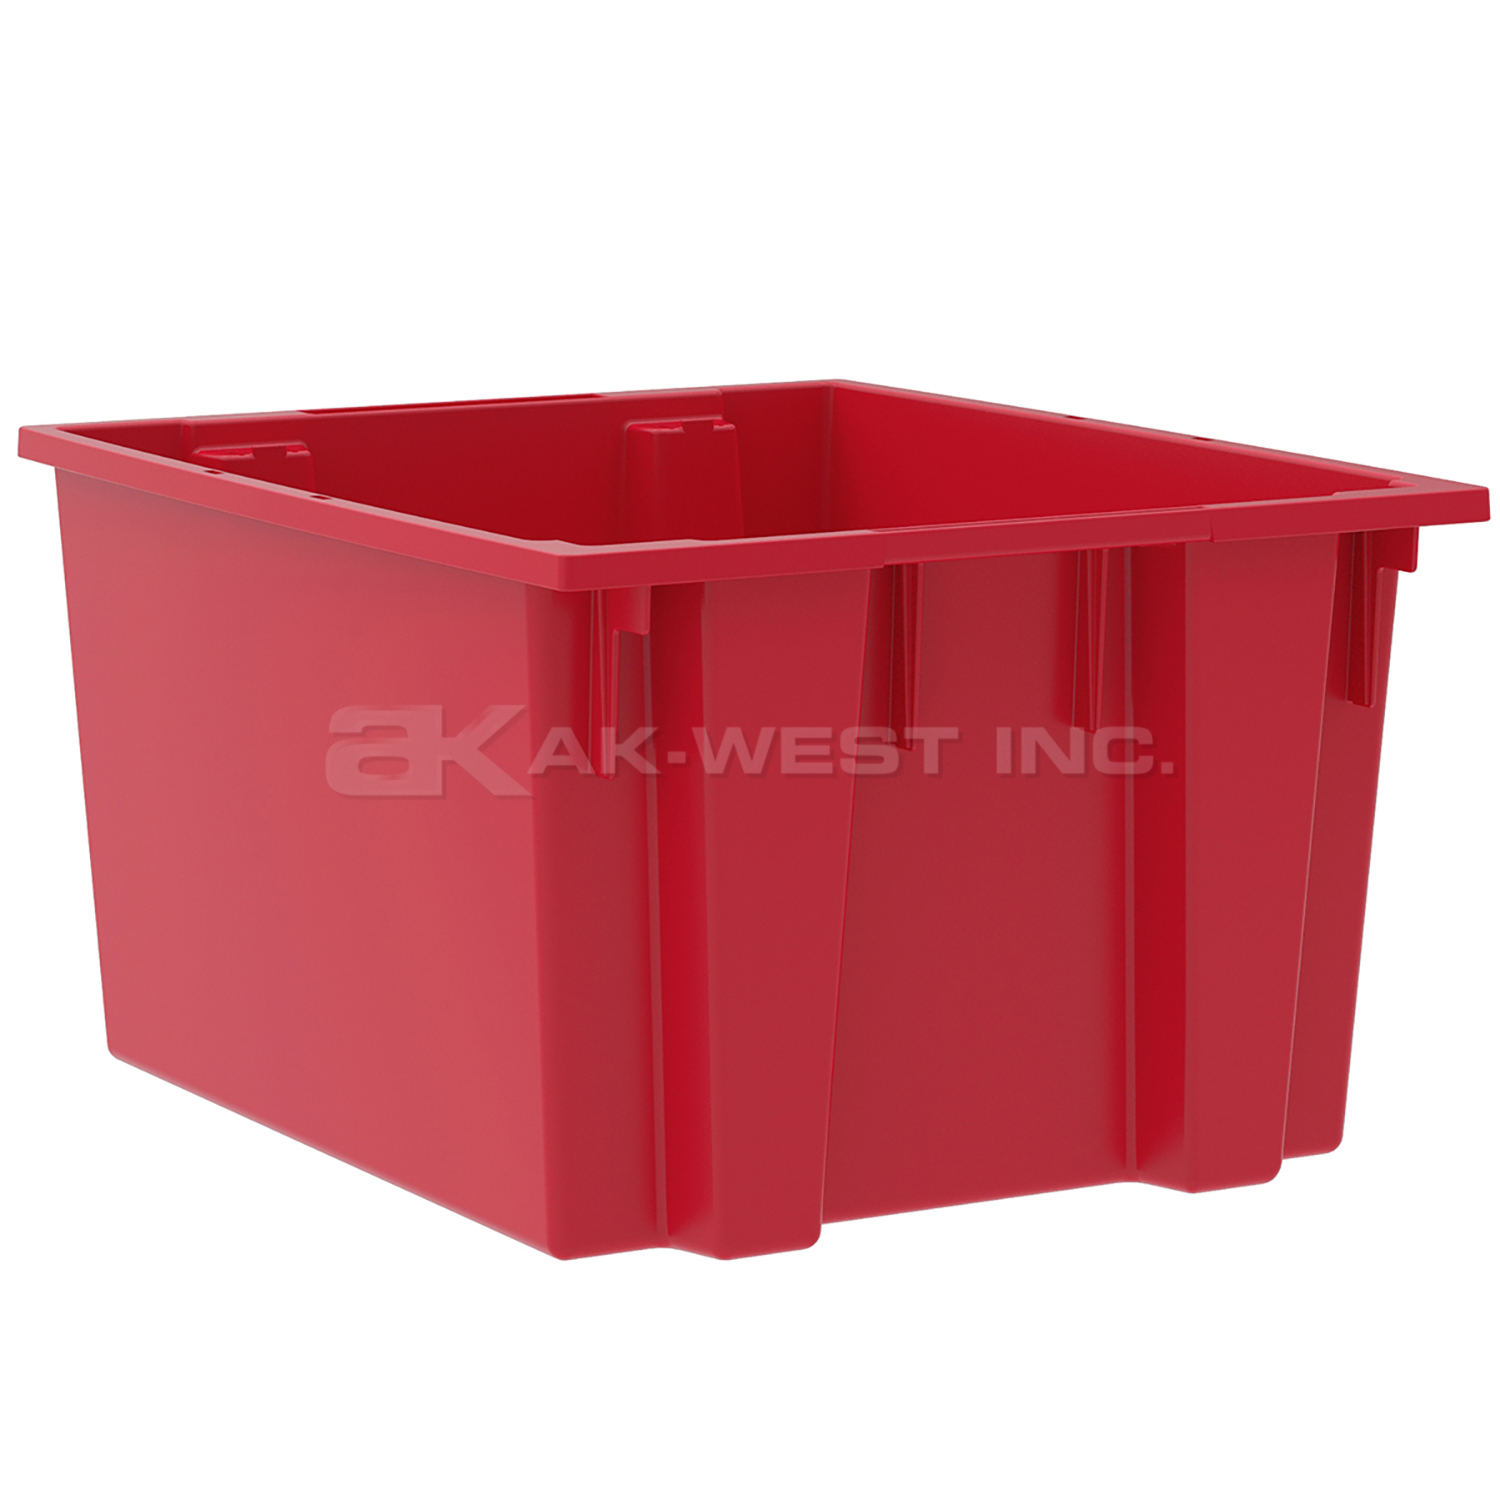 Red, 23-1/2" x 19-1/2" x 13" Nest and Stack Tote (3 Per Carton)